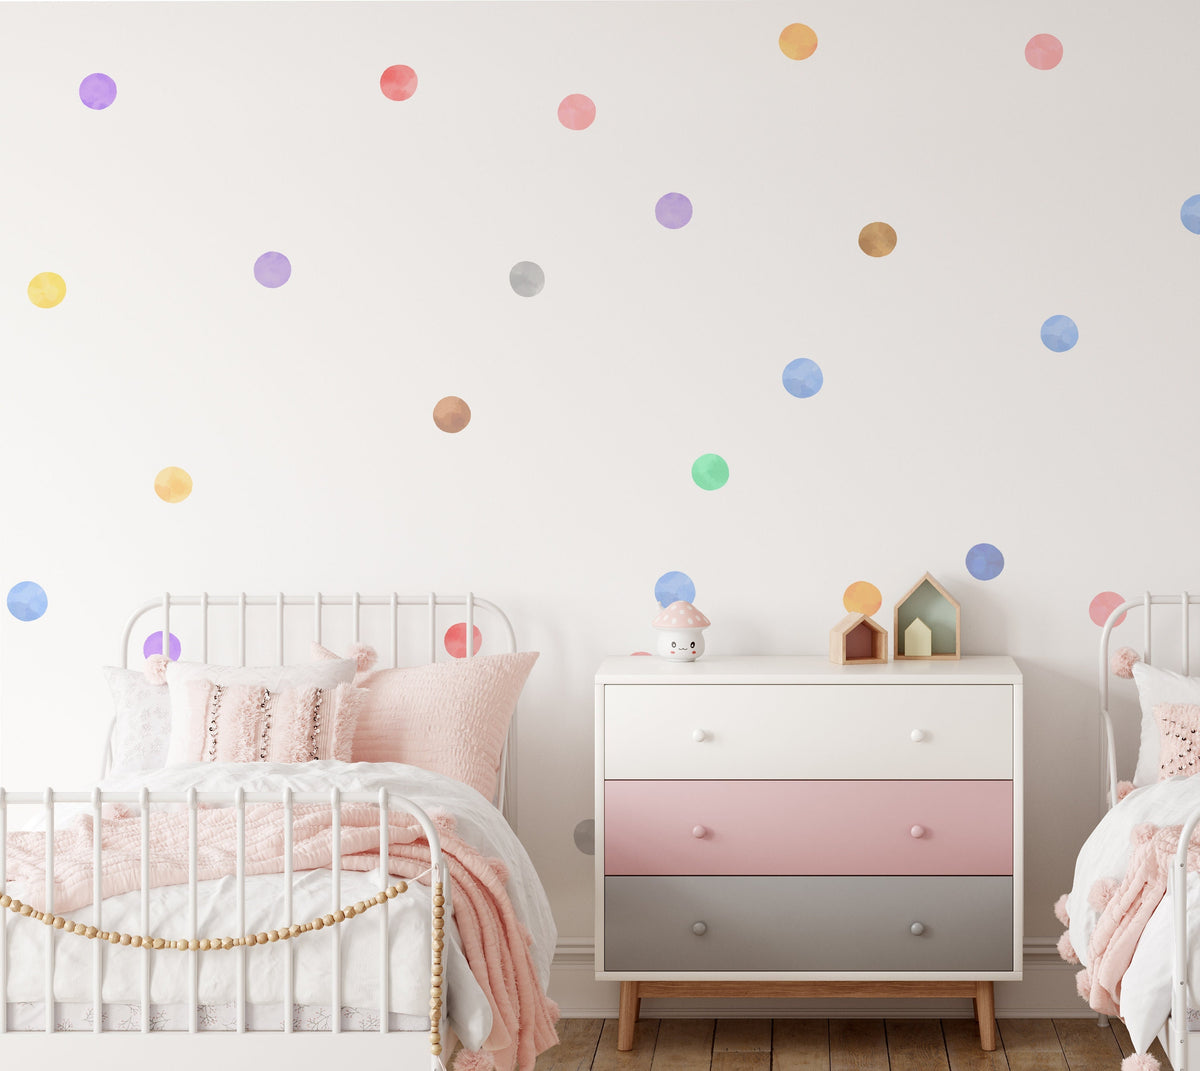 Water Colour Pastel Polka Dot Wall Stickers Decals | Kids Rooms Nursery Playroom Wall Decals | Removable Peel & Stick